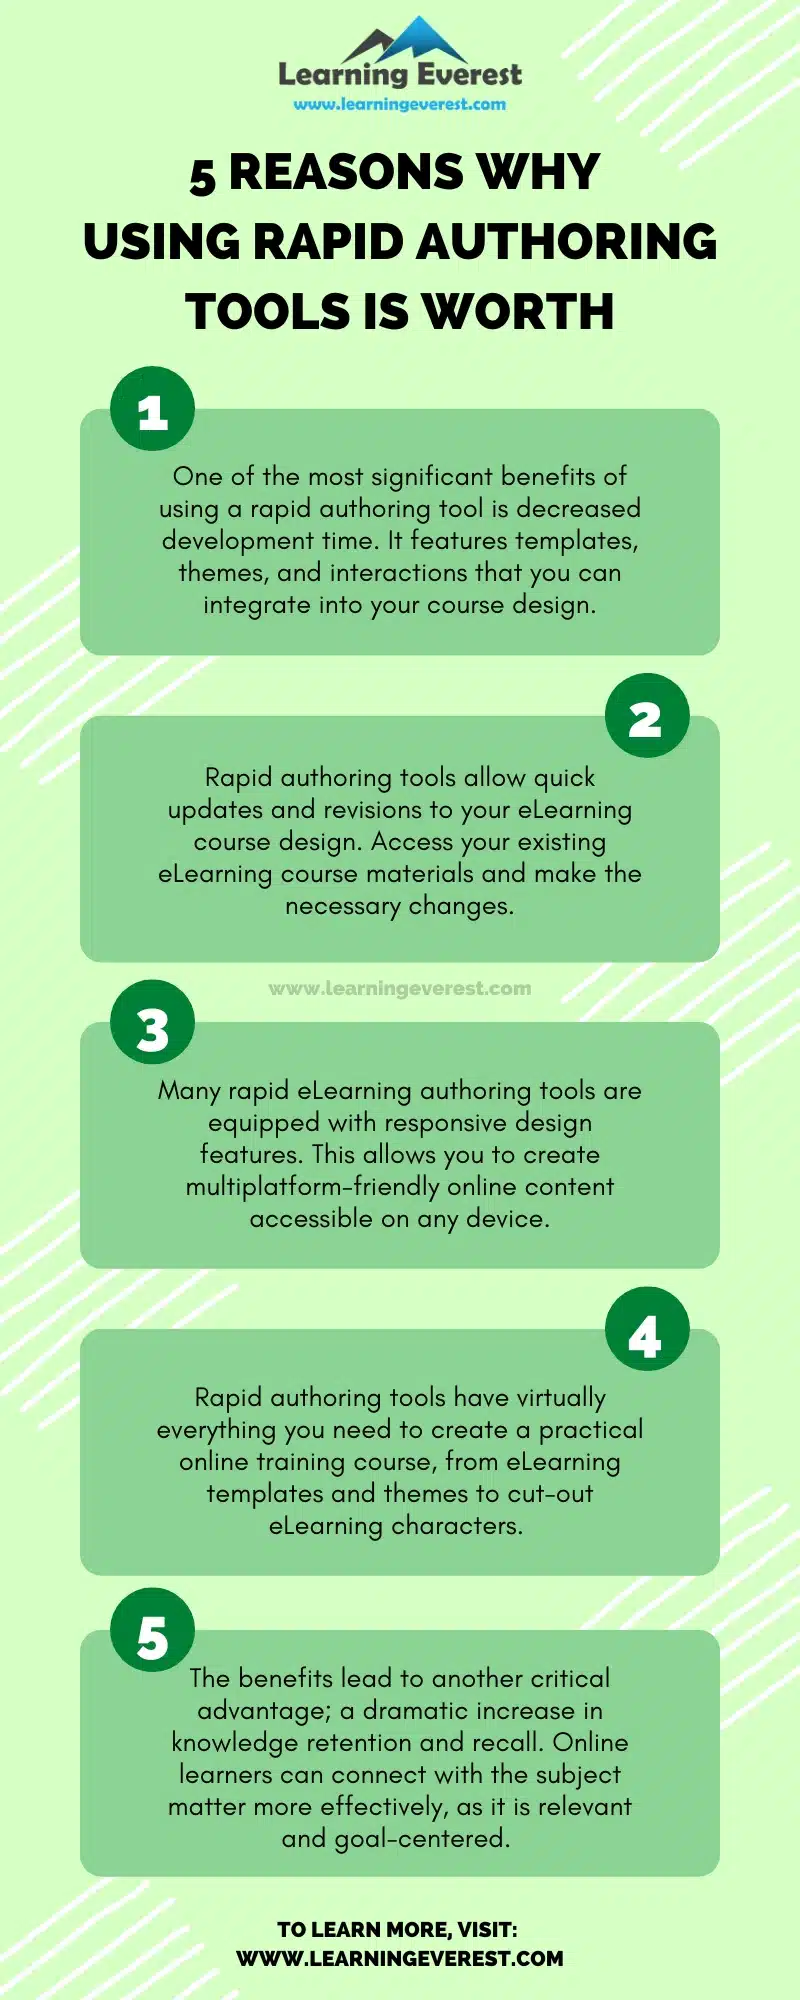 5 Benefits of Using Rapid Authoring Tools to Create eLearning Courses